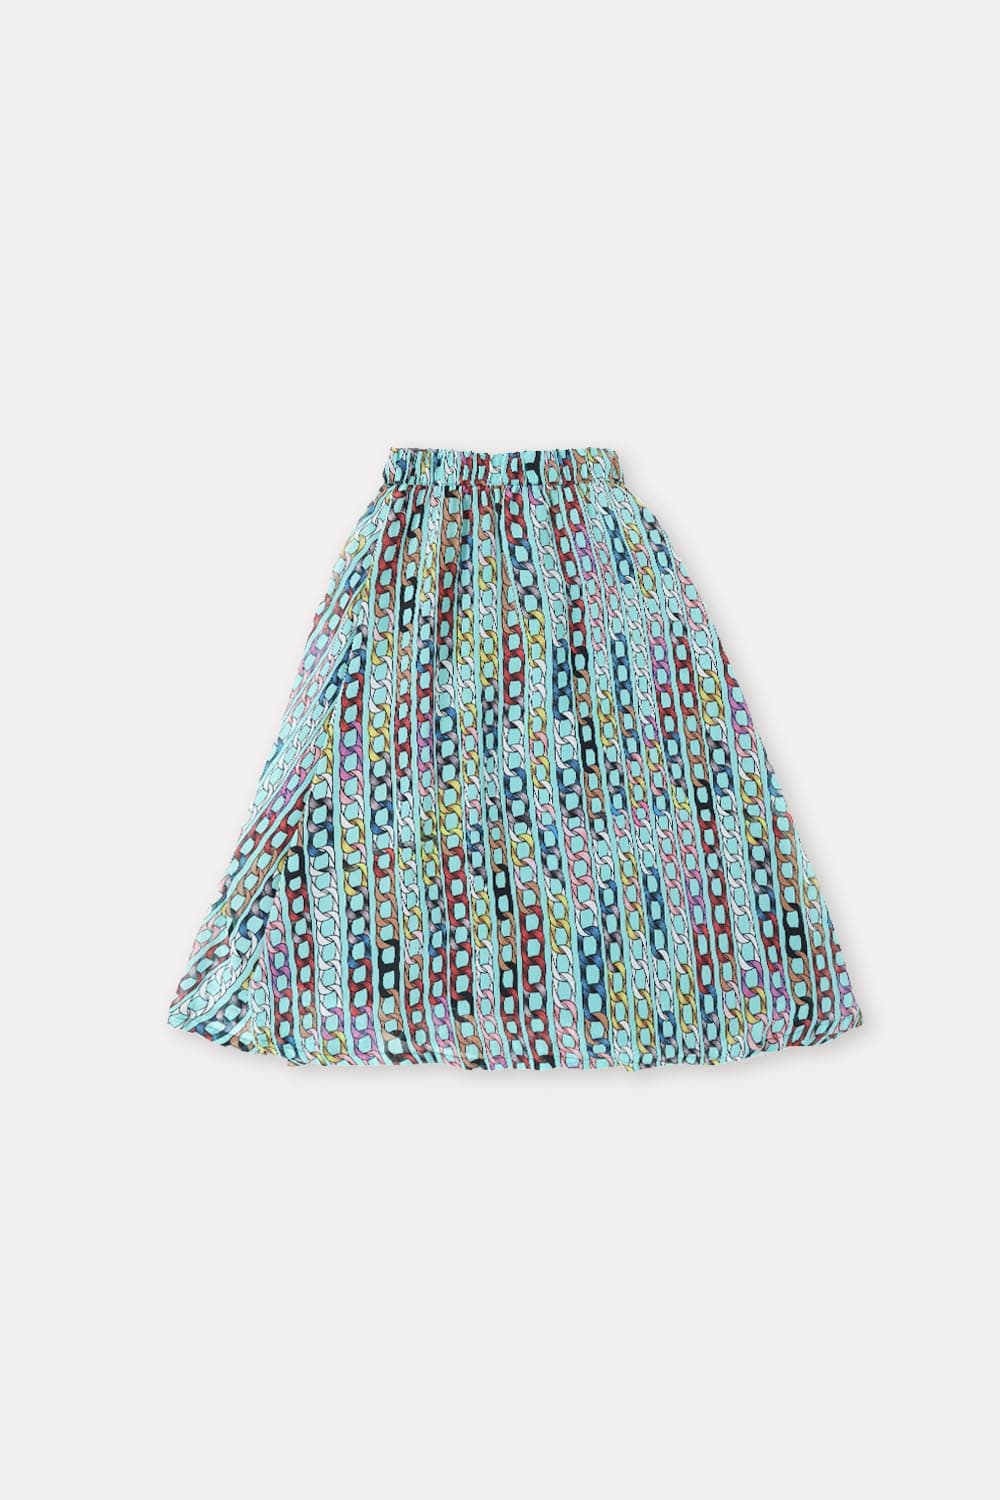 Hope Not Out by Shahid Afridi Eastern Girls Skirts Kids Flora Green Multi Skirt